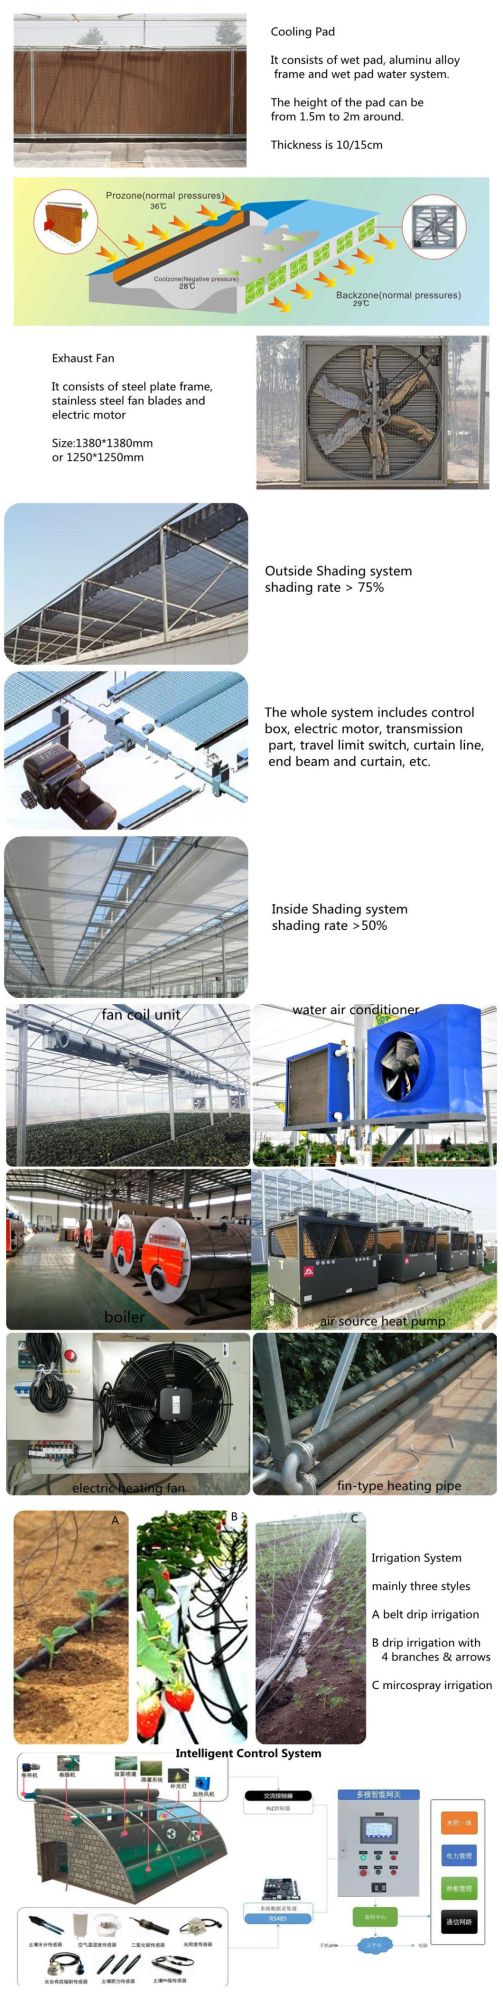 Factory Manufactured Models of Agriculture Seedling Machines with Watering Station and Air Compressor for Complete Sowing Handling for Farming